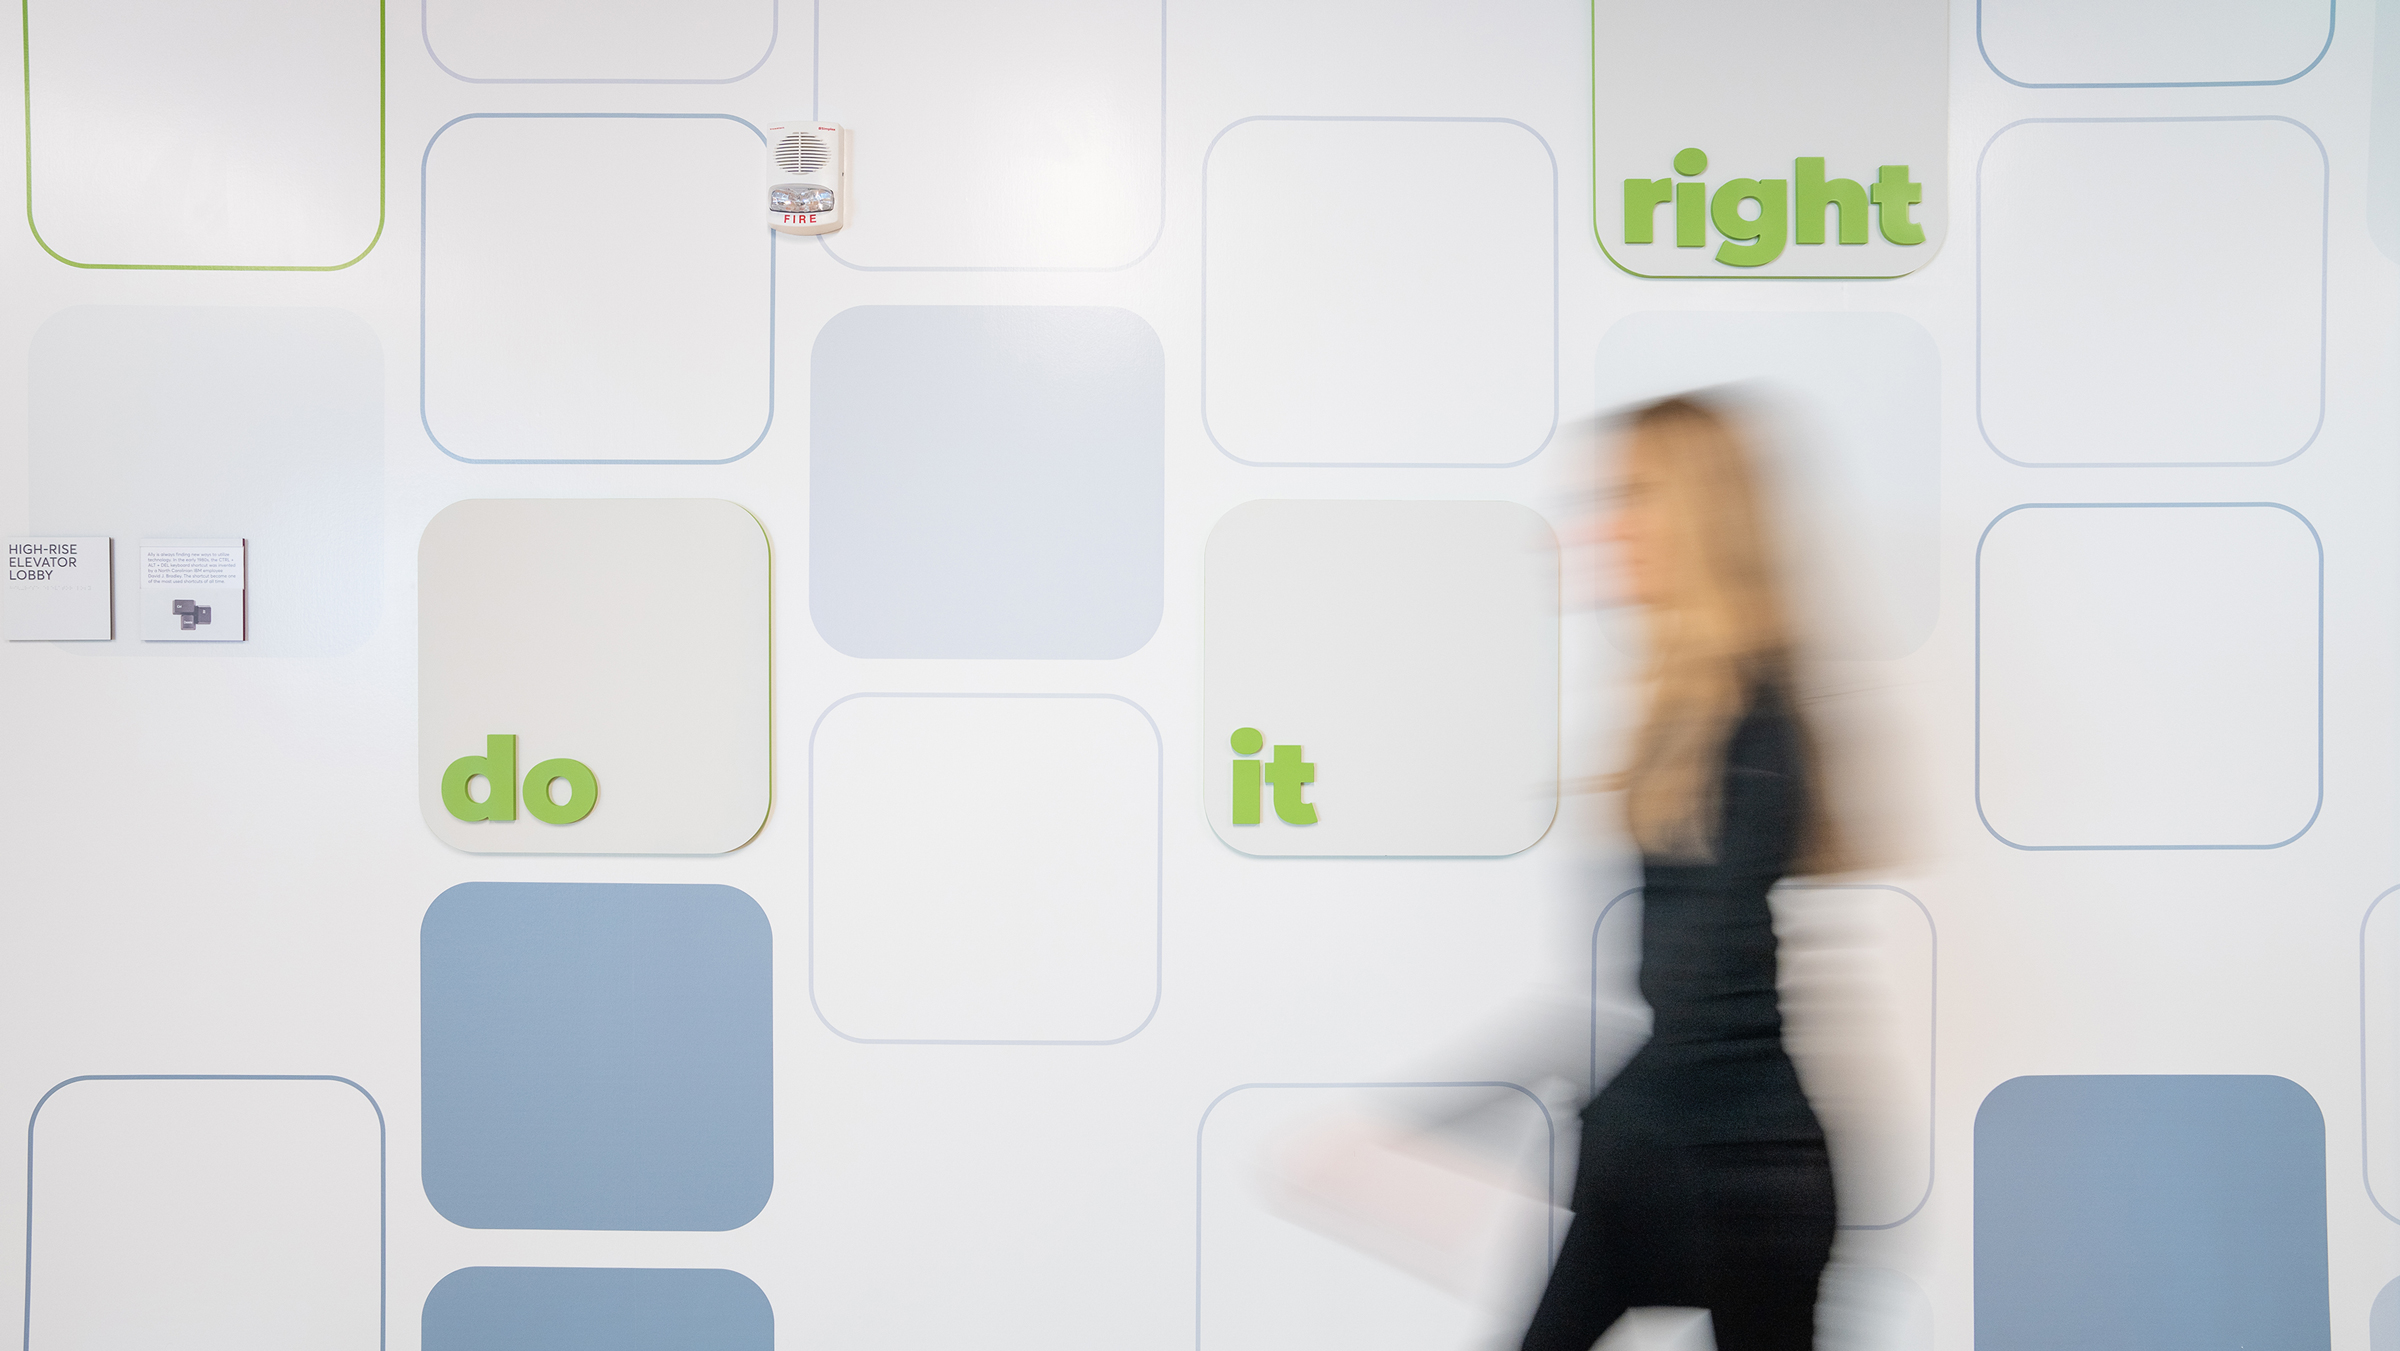 Person walking past a wall graphic with dimensional rounded squares that say "do," "it," and "right"